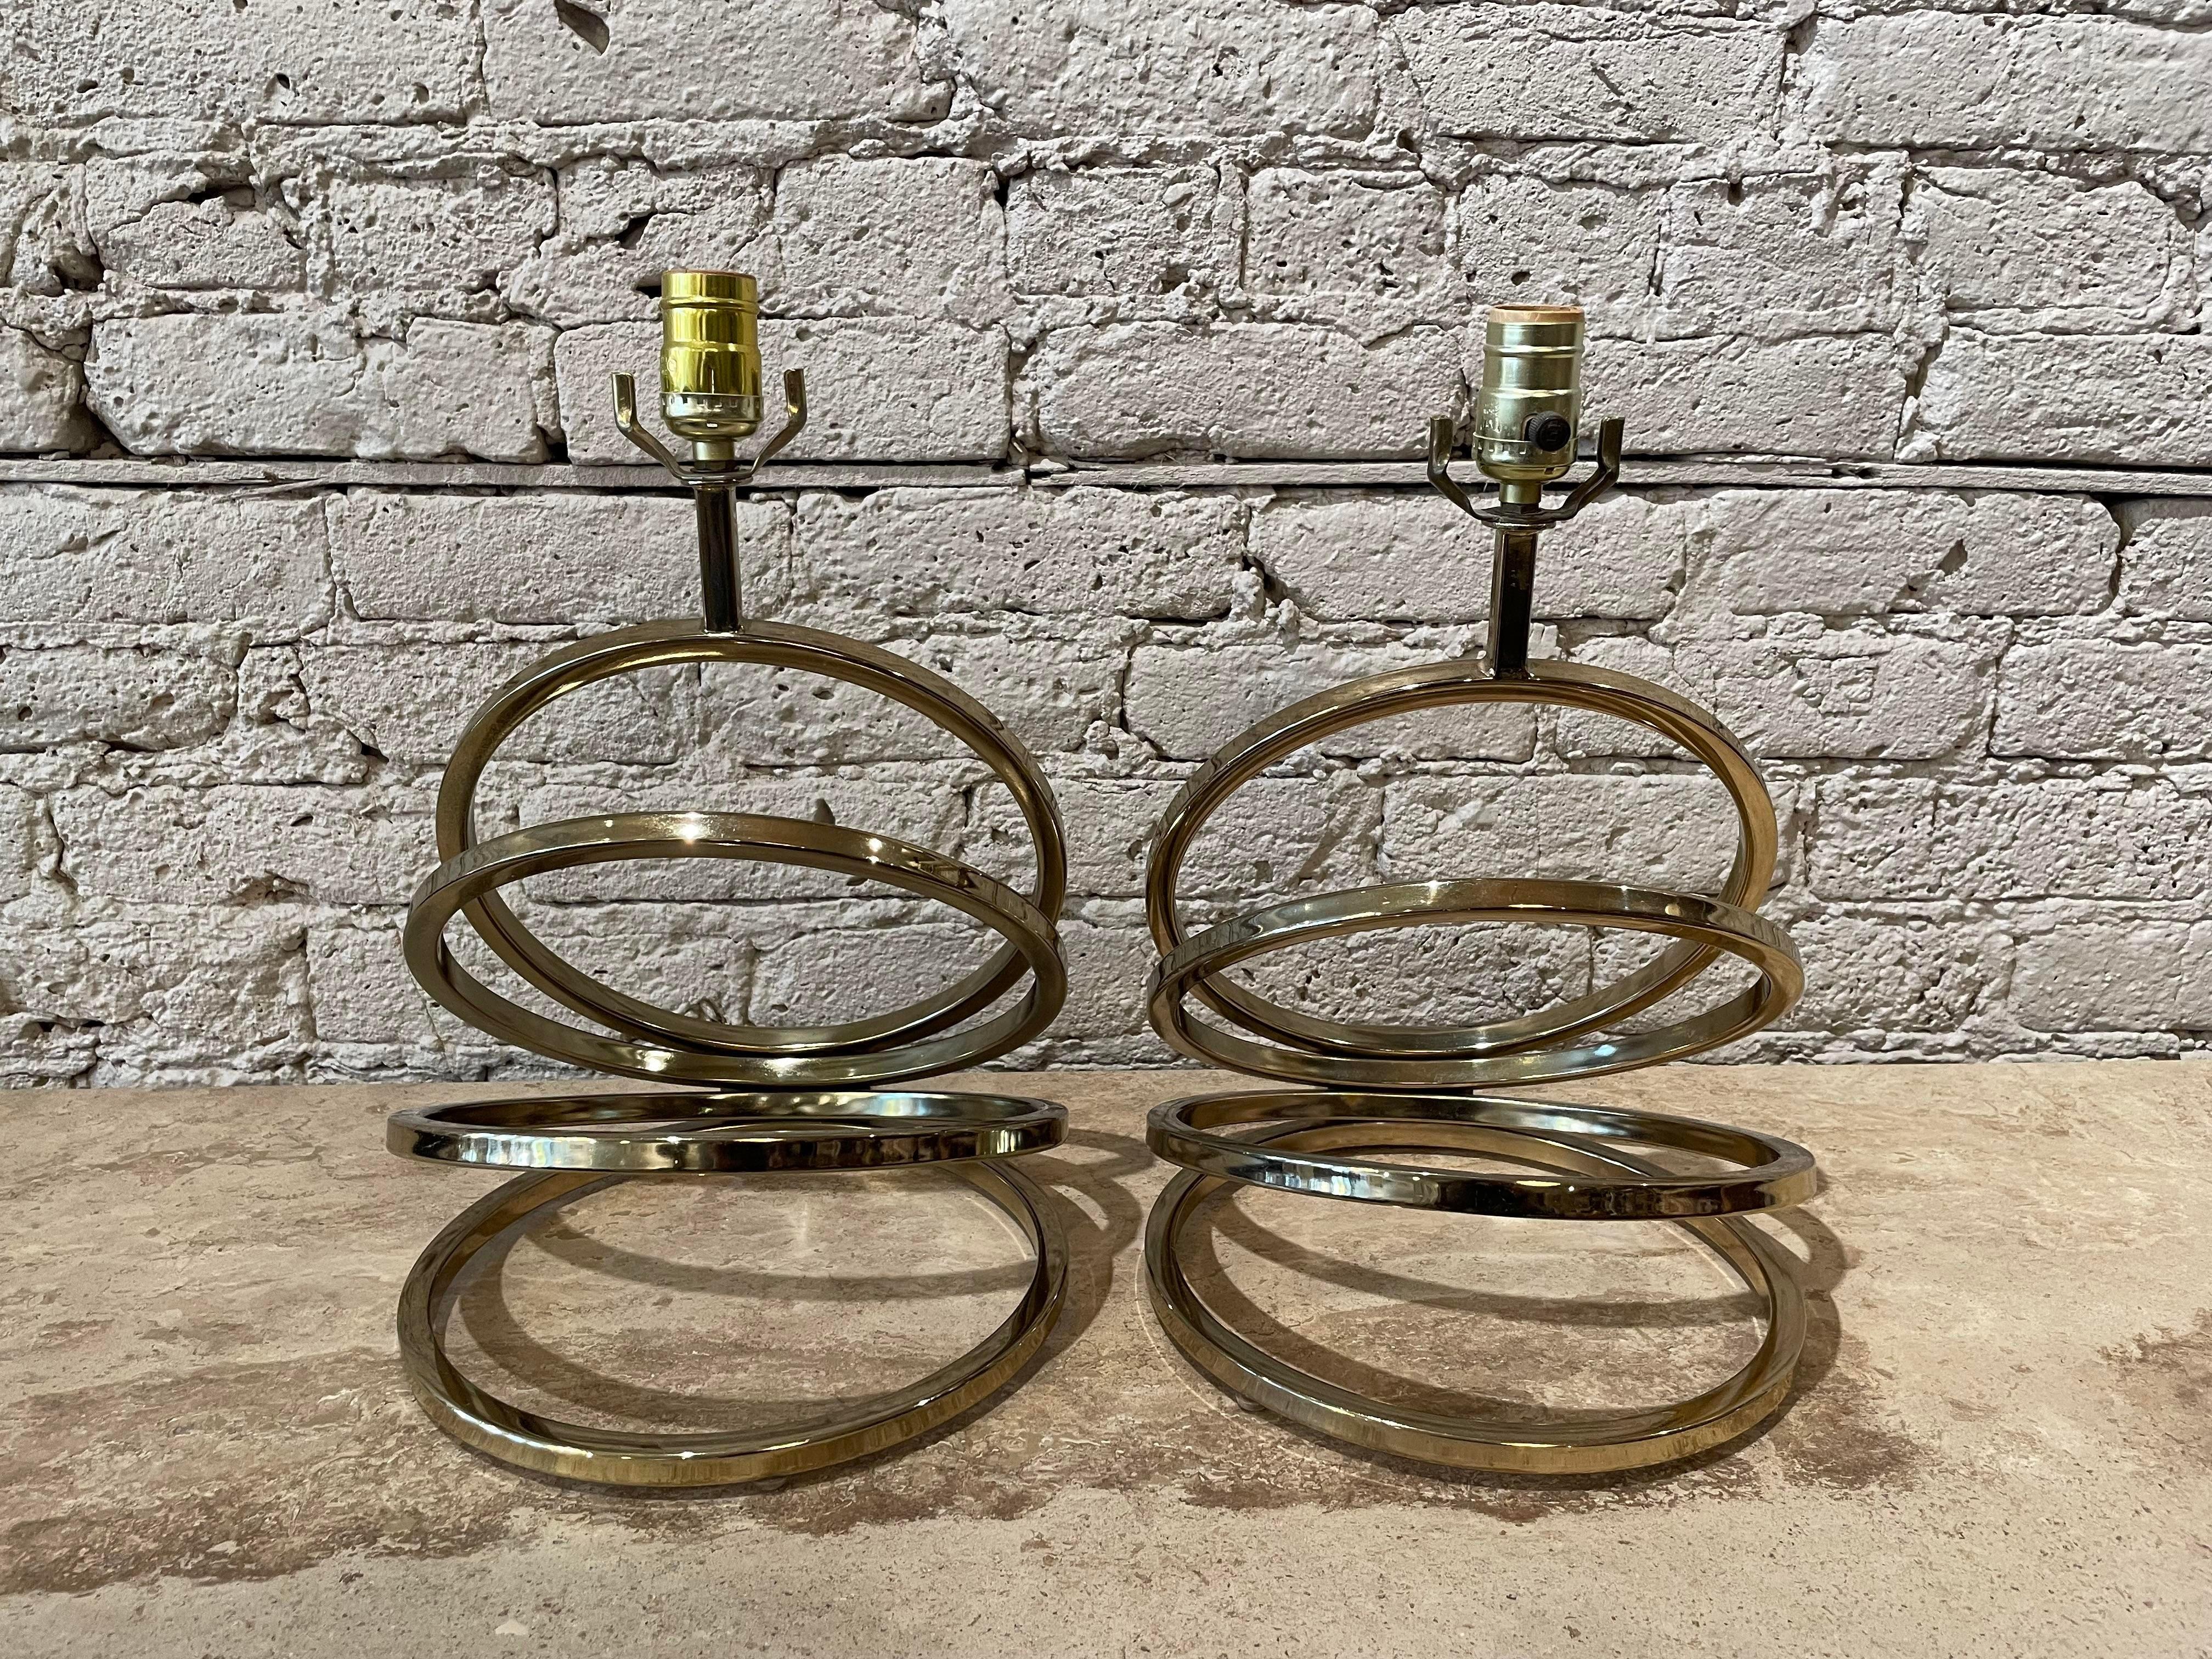 1960s Hollywood Regency Mid Century Vintage Brass Spiral Lamps - a Pair For Sale 6